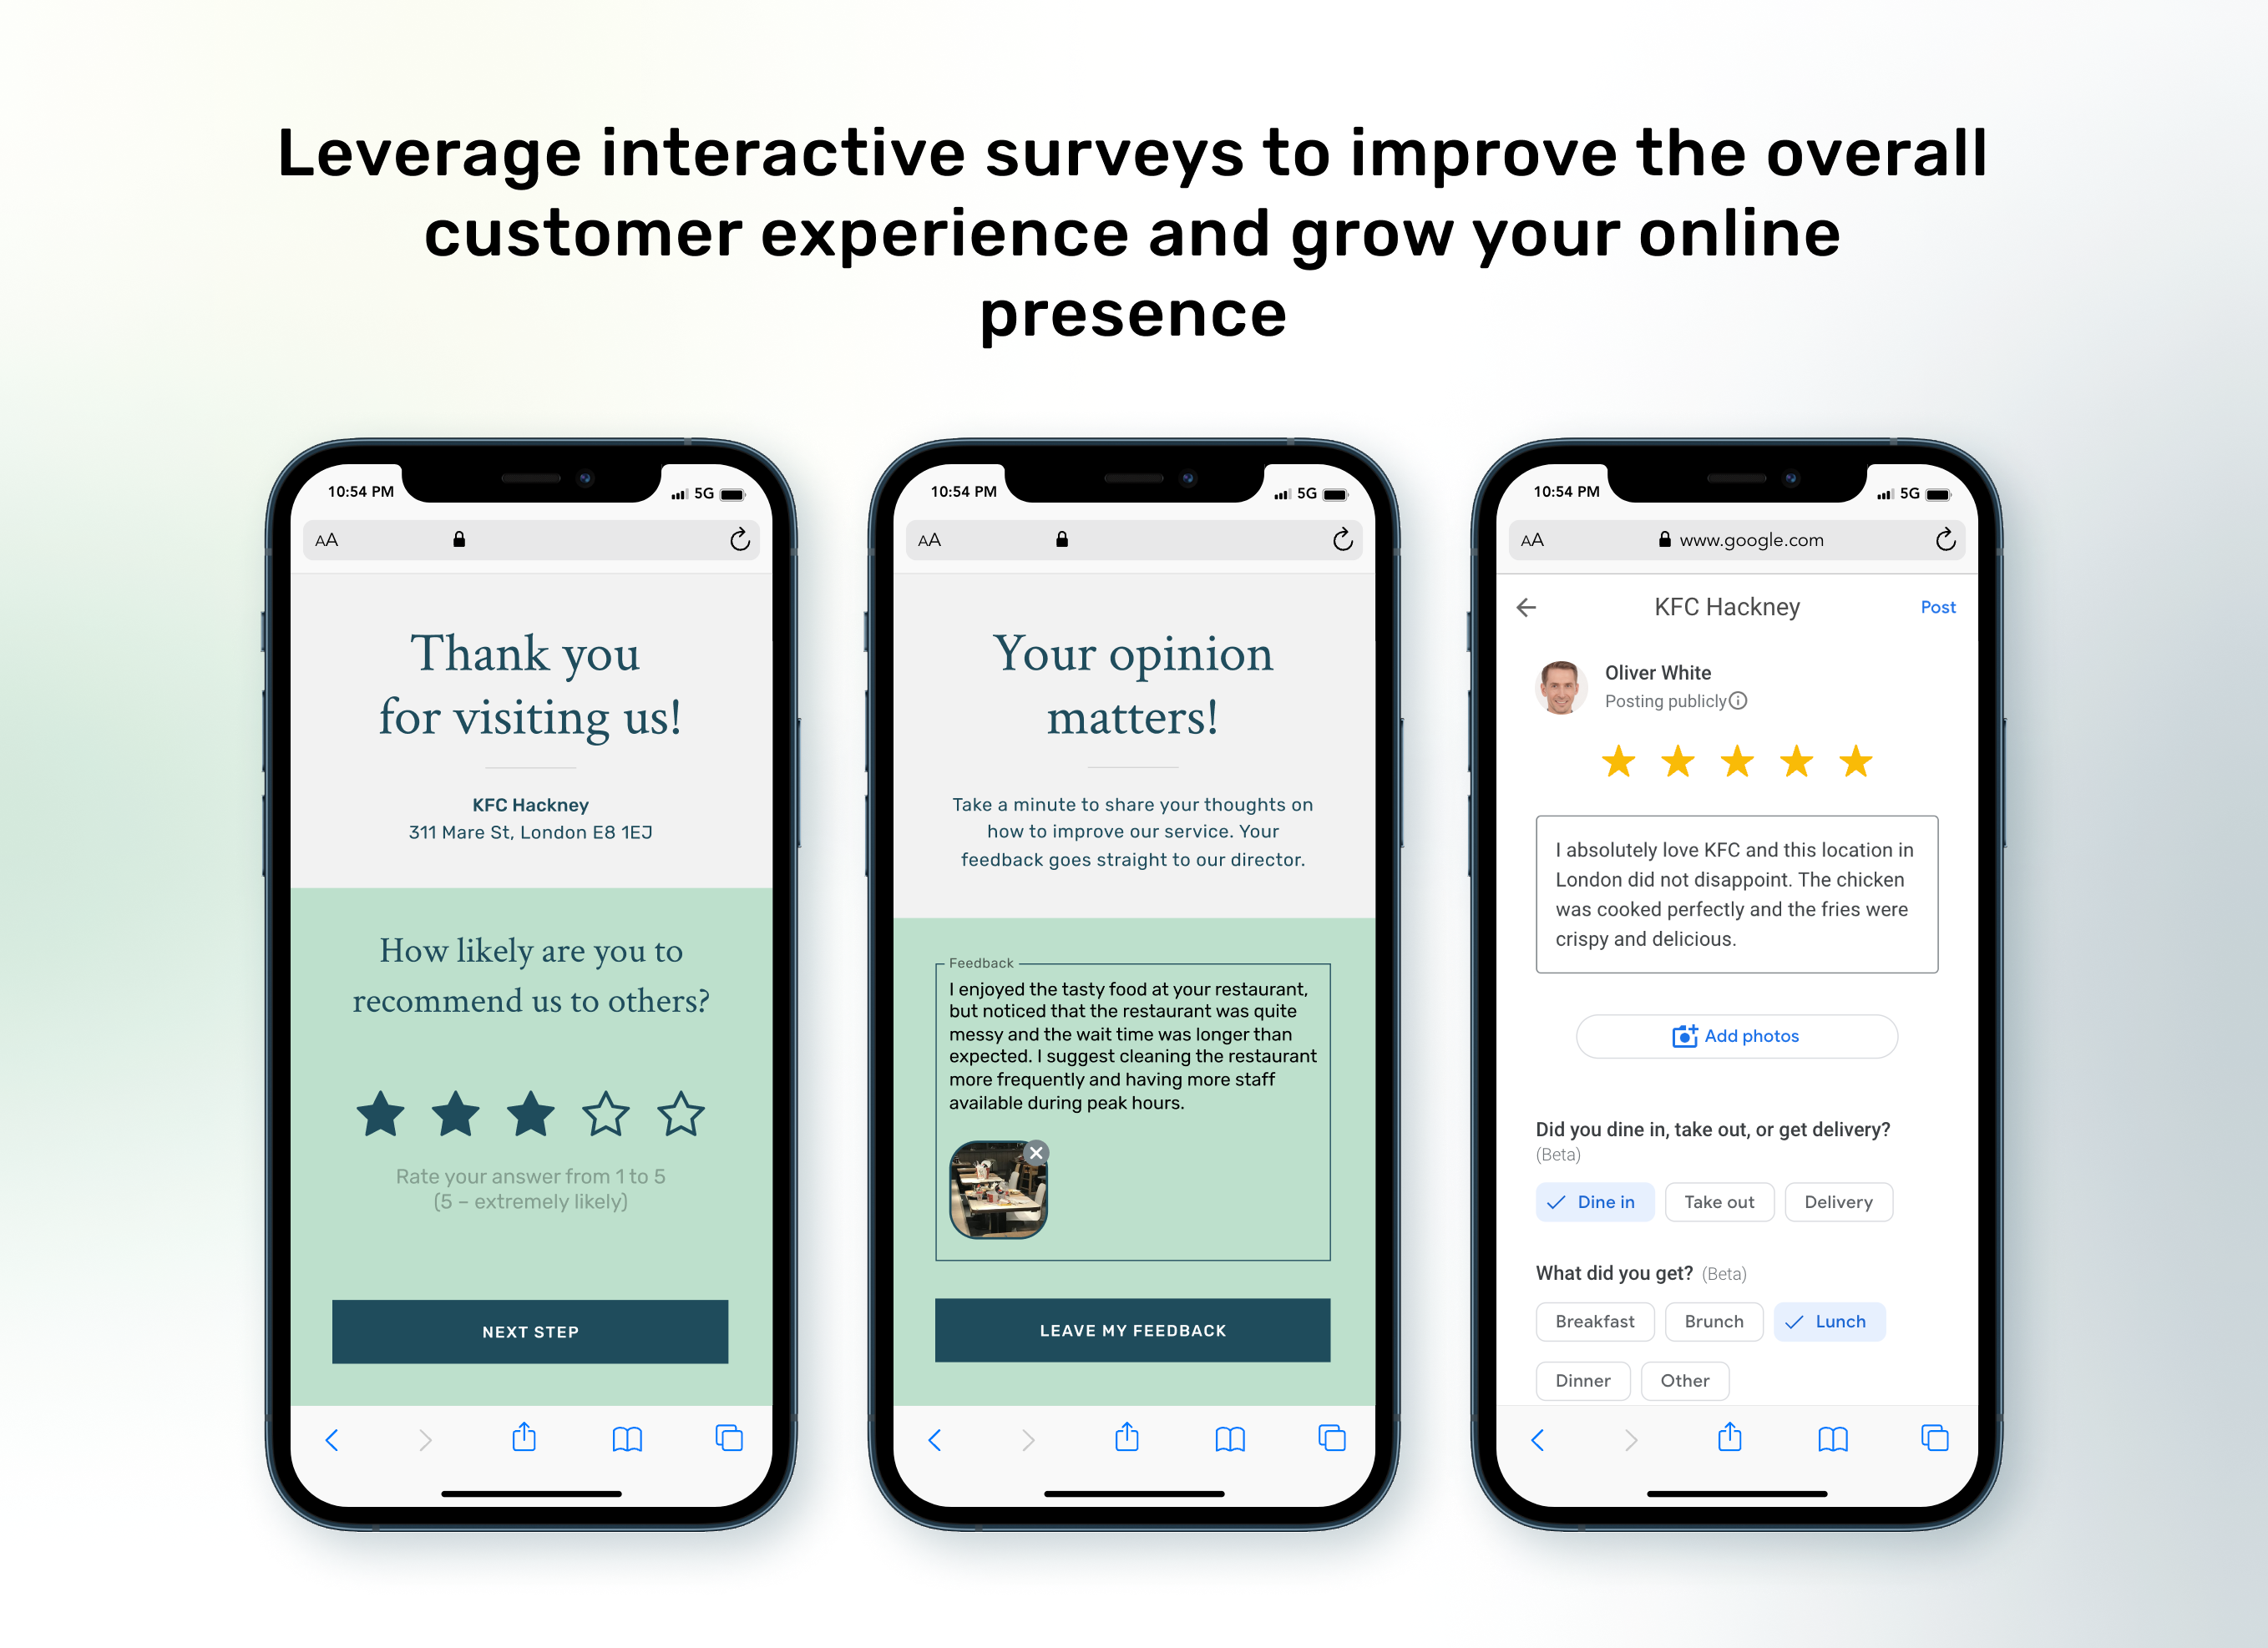 Encouraging the sharing of positive reviews and promptly responding to negative ones, businesses can enhance their overall customer experience and expand their online presence through the platform.